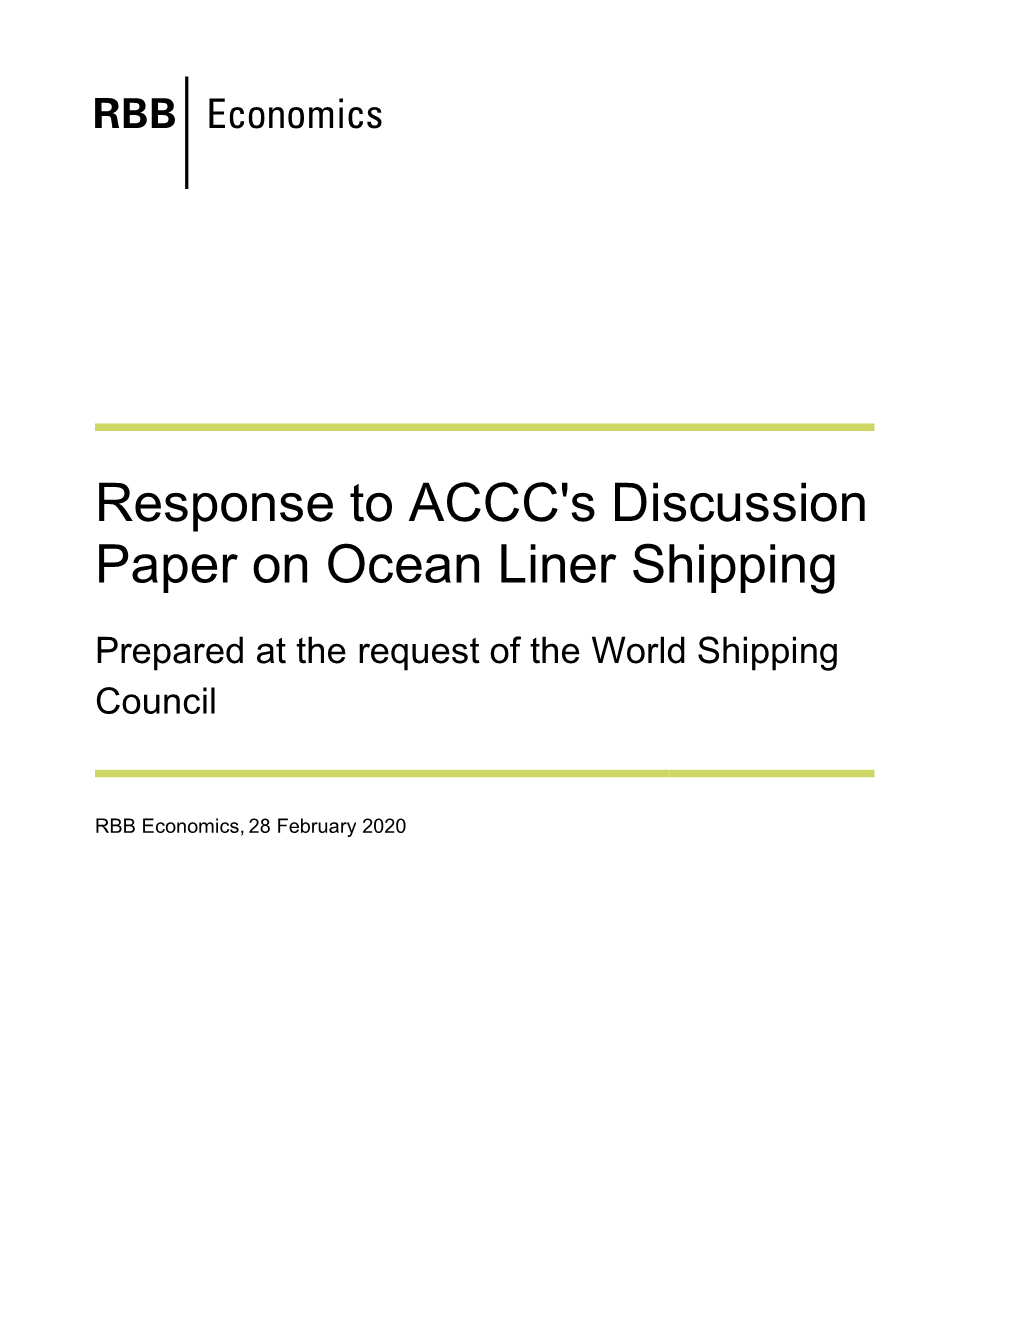 Response to ACCC's Discussion Paper on Ocean Liner Shipping